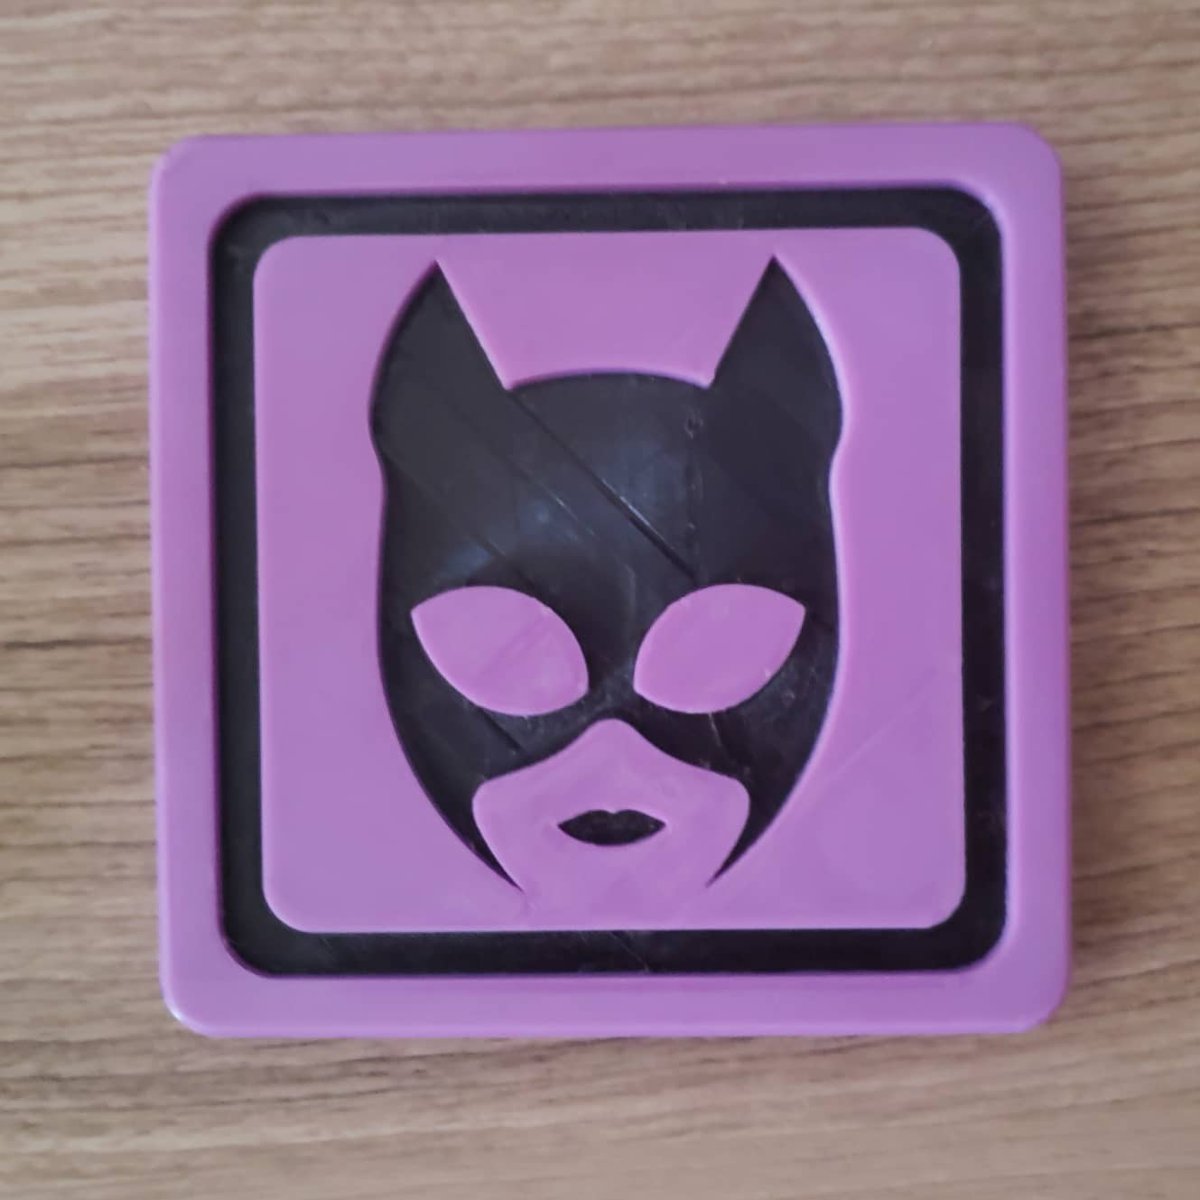 A commission for a Catwoman coaster, 3D printed in purple & black!
#dc #dccomics #dcuniverse #dcextendeduniverse #catwoman #dccatwoman #batman #catwomanart #catwomanfanart #catwomanandbatman #poisonivy #harleyquinn #batmanandcatwoman #3Dprints #catwomancomics #catwomancoaster